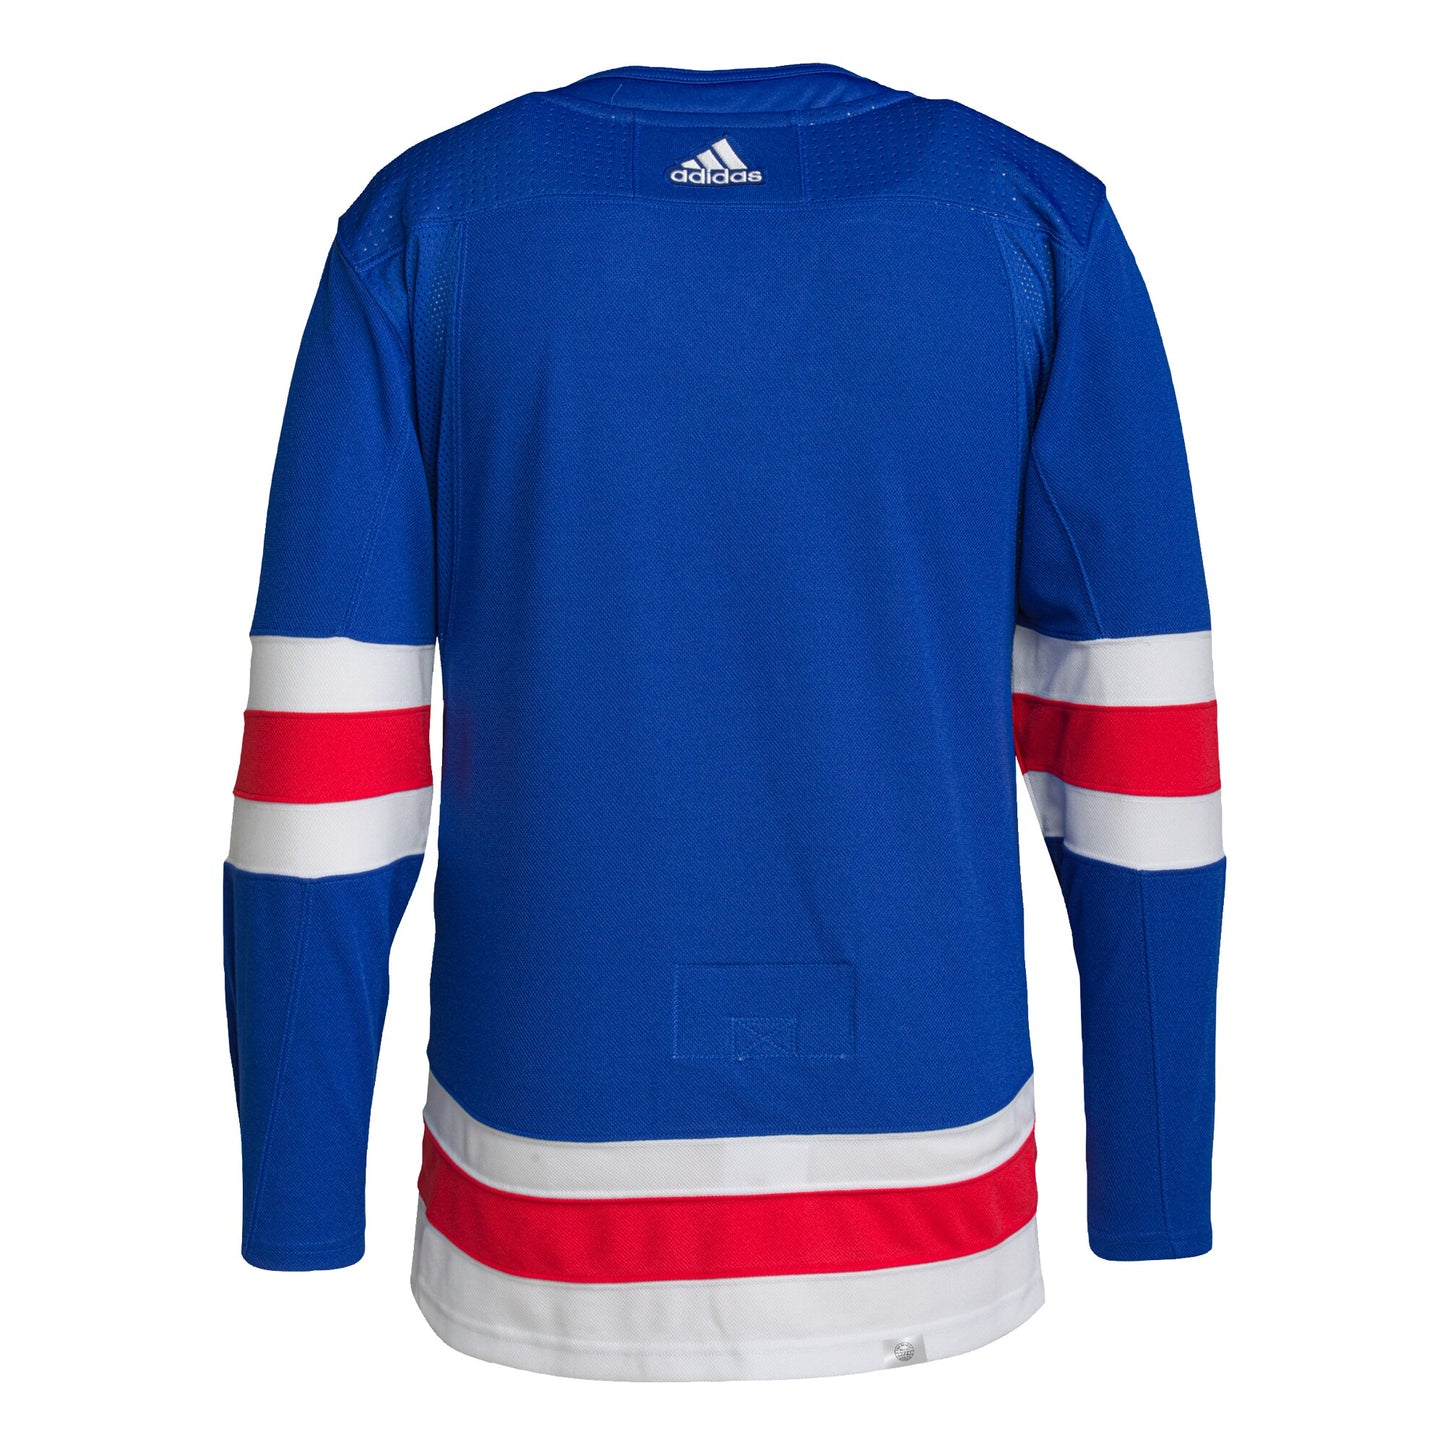 New York Rangers adidas Home Primegreen Authentic Pro Jersey - Royal